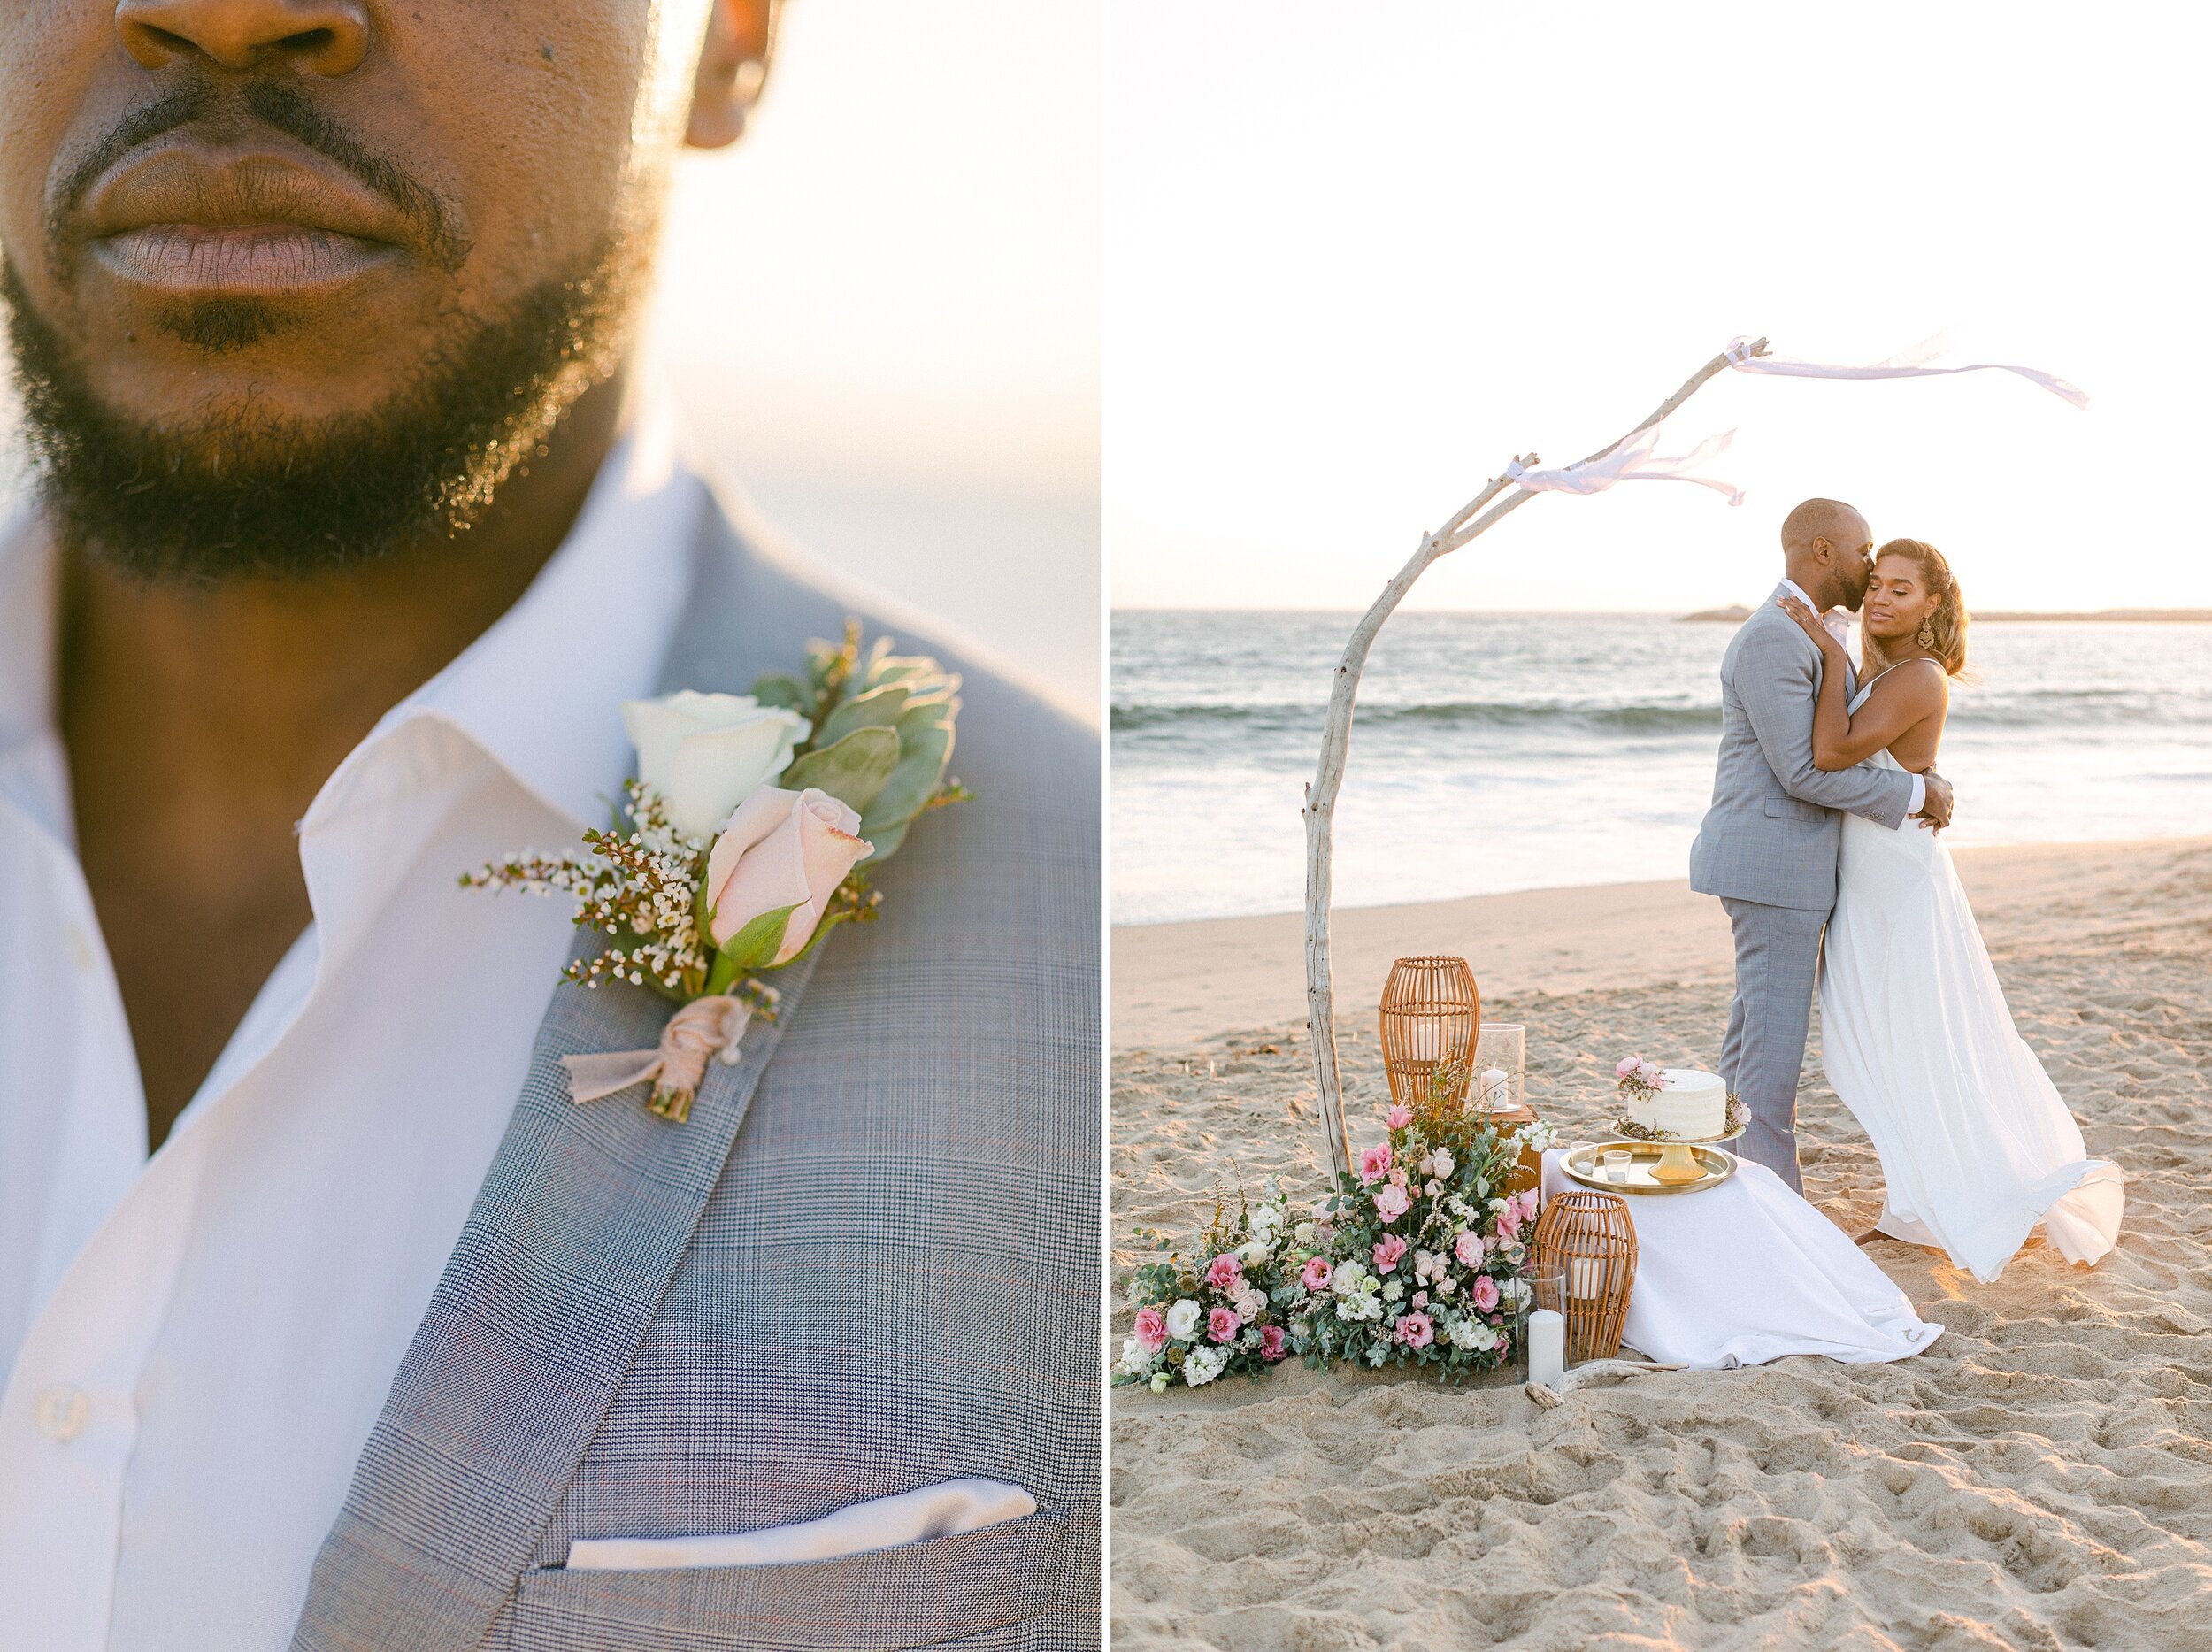 Couple of color take sunset wedding portraits following their romantic beach elopement in Marina Del Rey, CA.  Bride and groom embrace under driftwood arch with silk ribbon